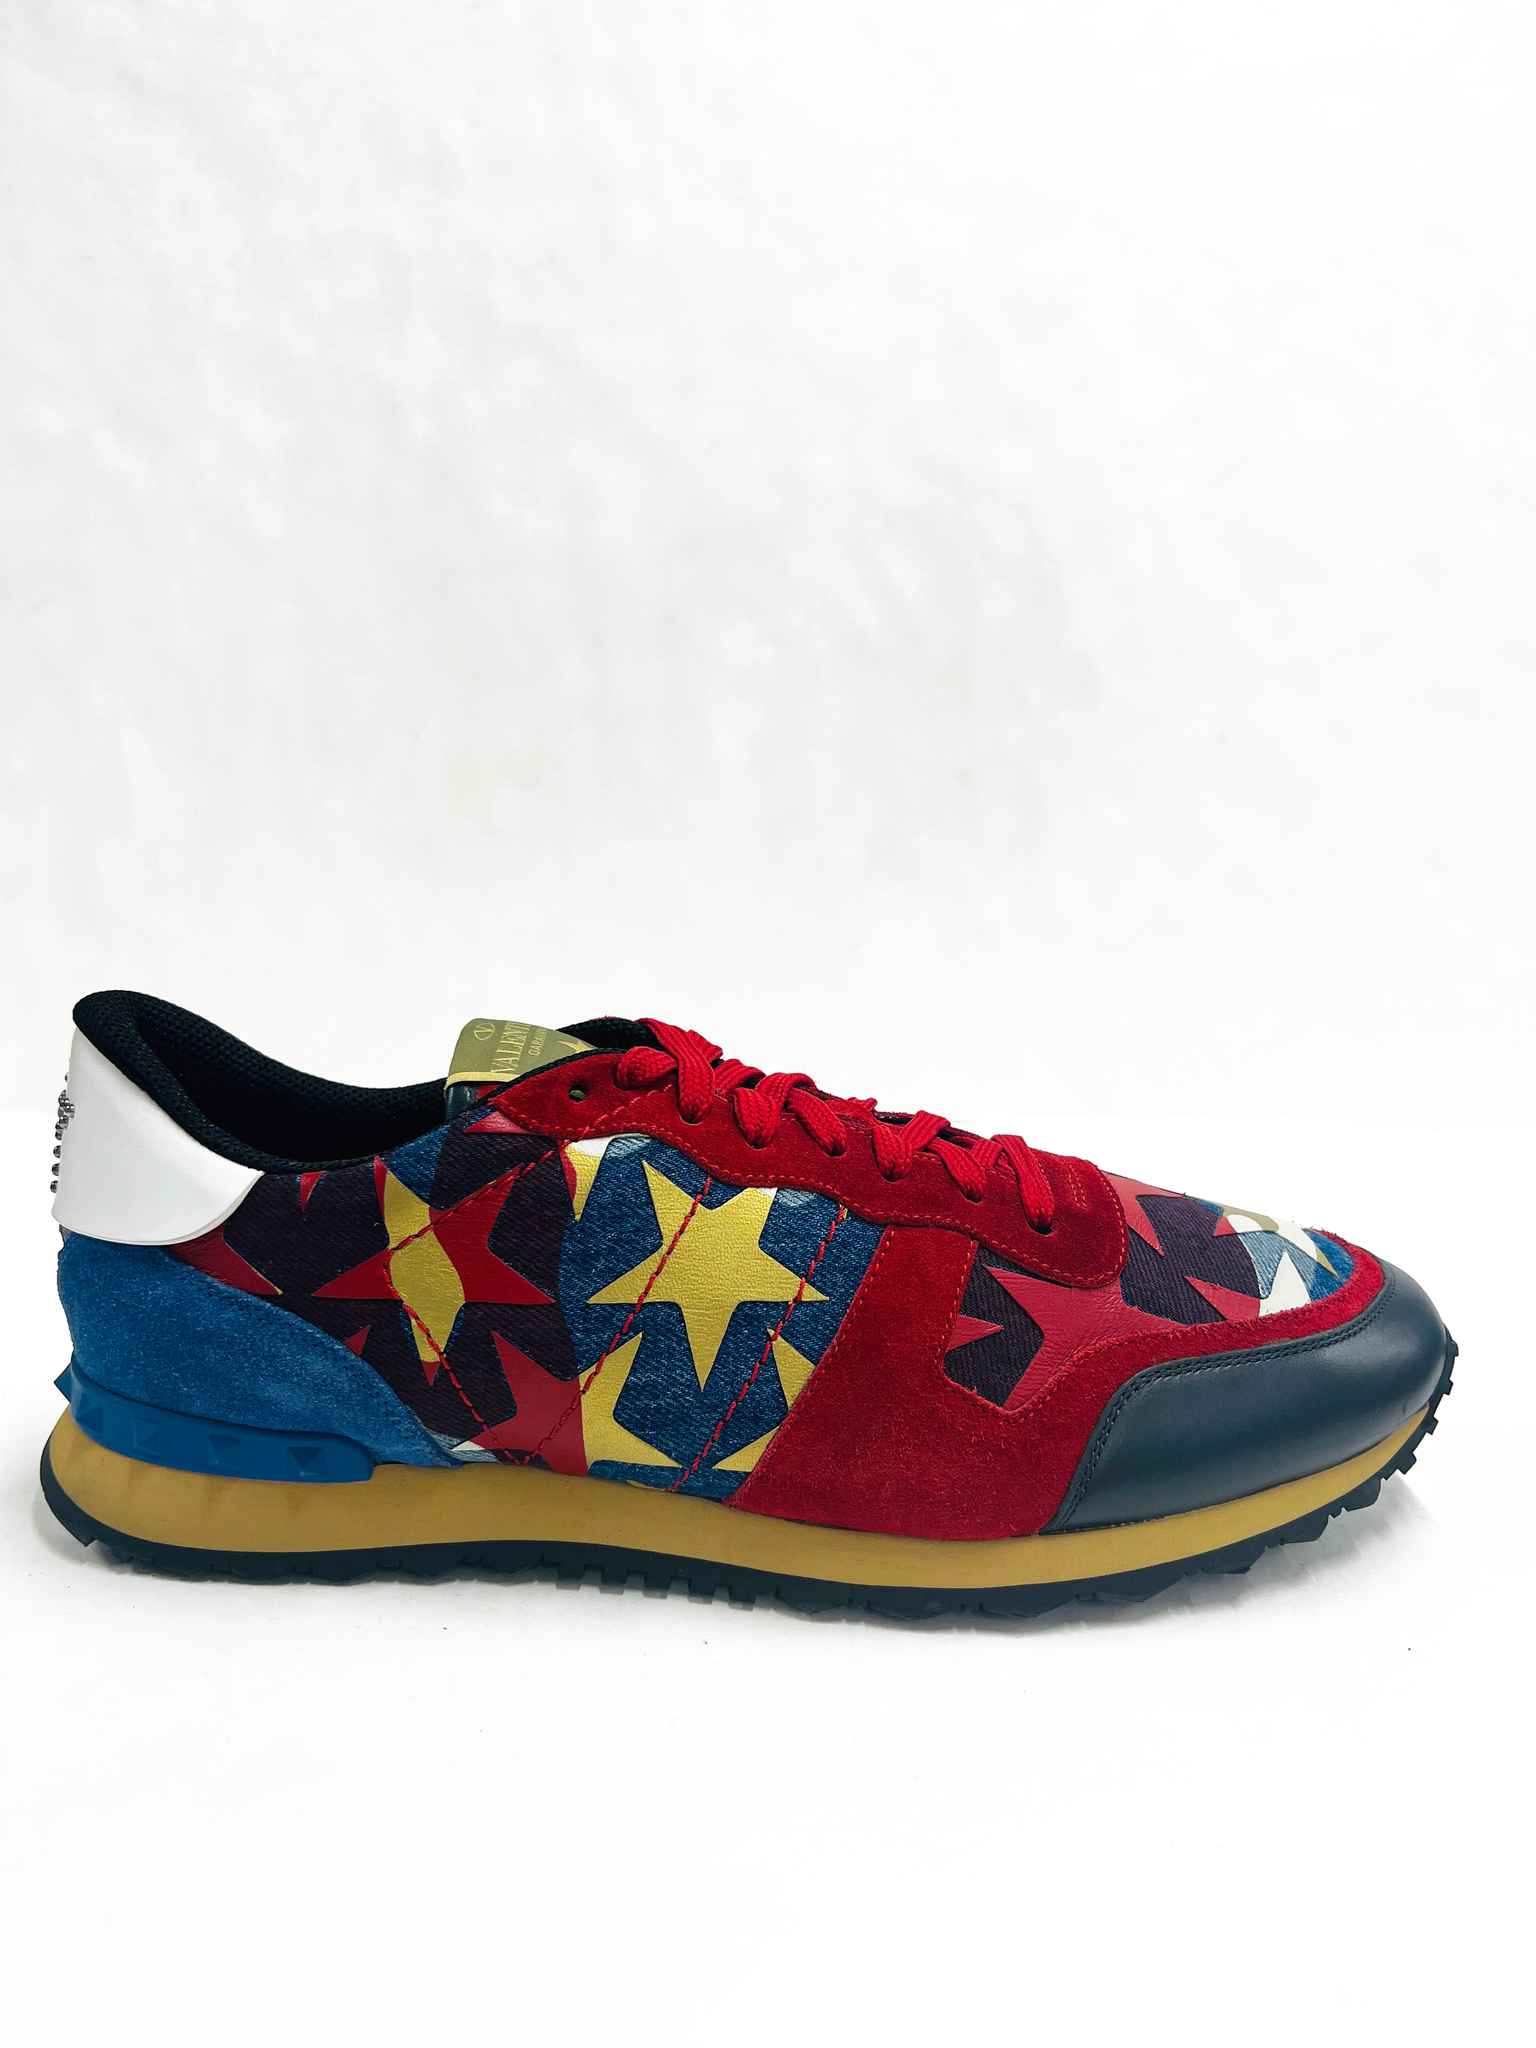 CA VALENTINO ROCKRUNNER STAR-STUDDED LEATHER SNEAKER RED/ WHITE/ BLUE CAMO STAR TRAINER-4